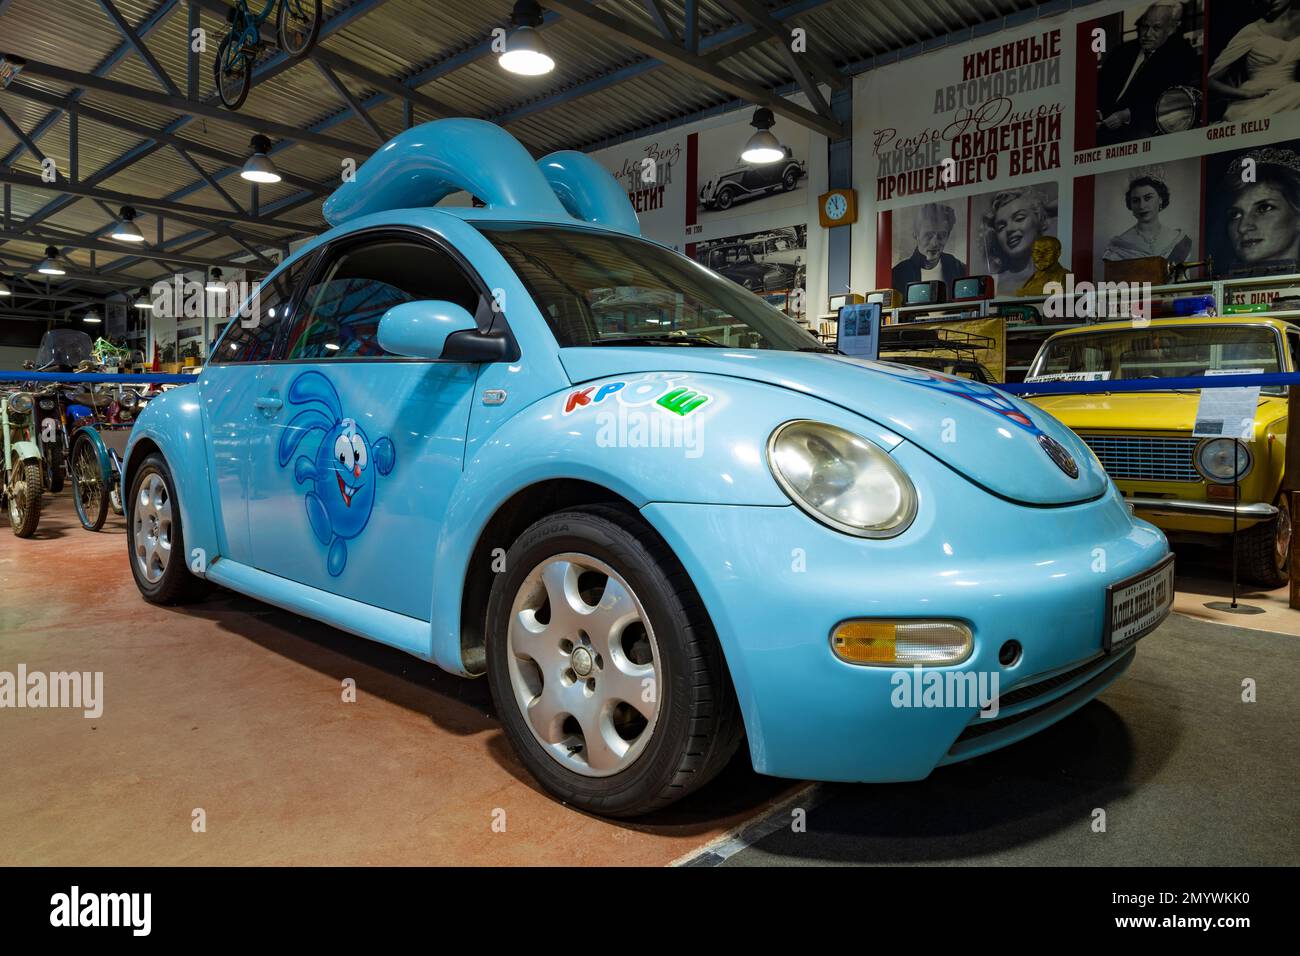 ZELENOGORSK, RUSSIA - JANUARY 27, 2023: Volkswagen New Beetle car in the form of a Krosh rabbit (Smeshariki cartoon series) close-up. Museum of retro Stock Photo